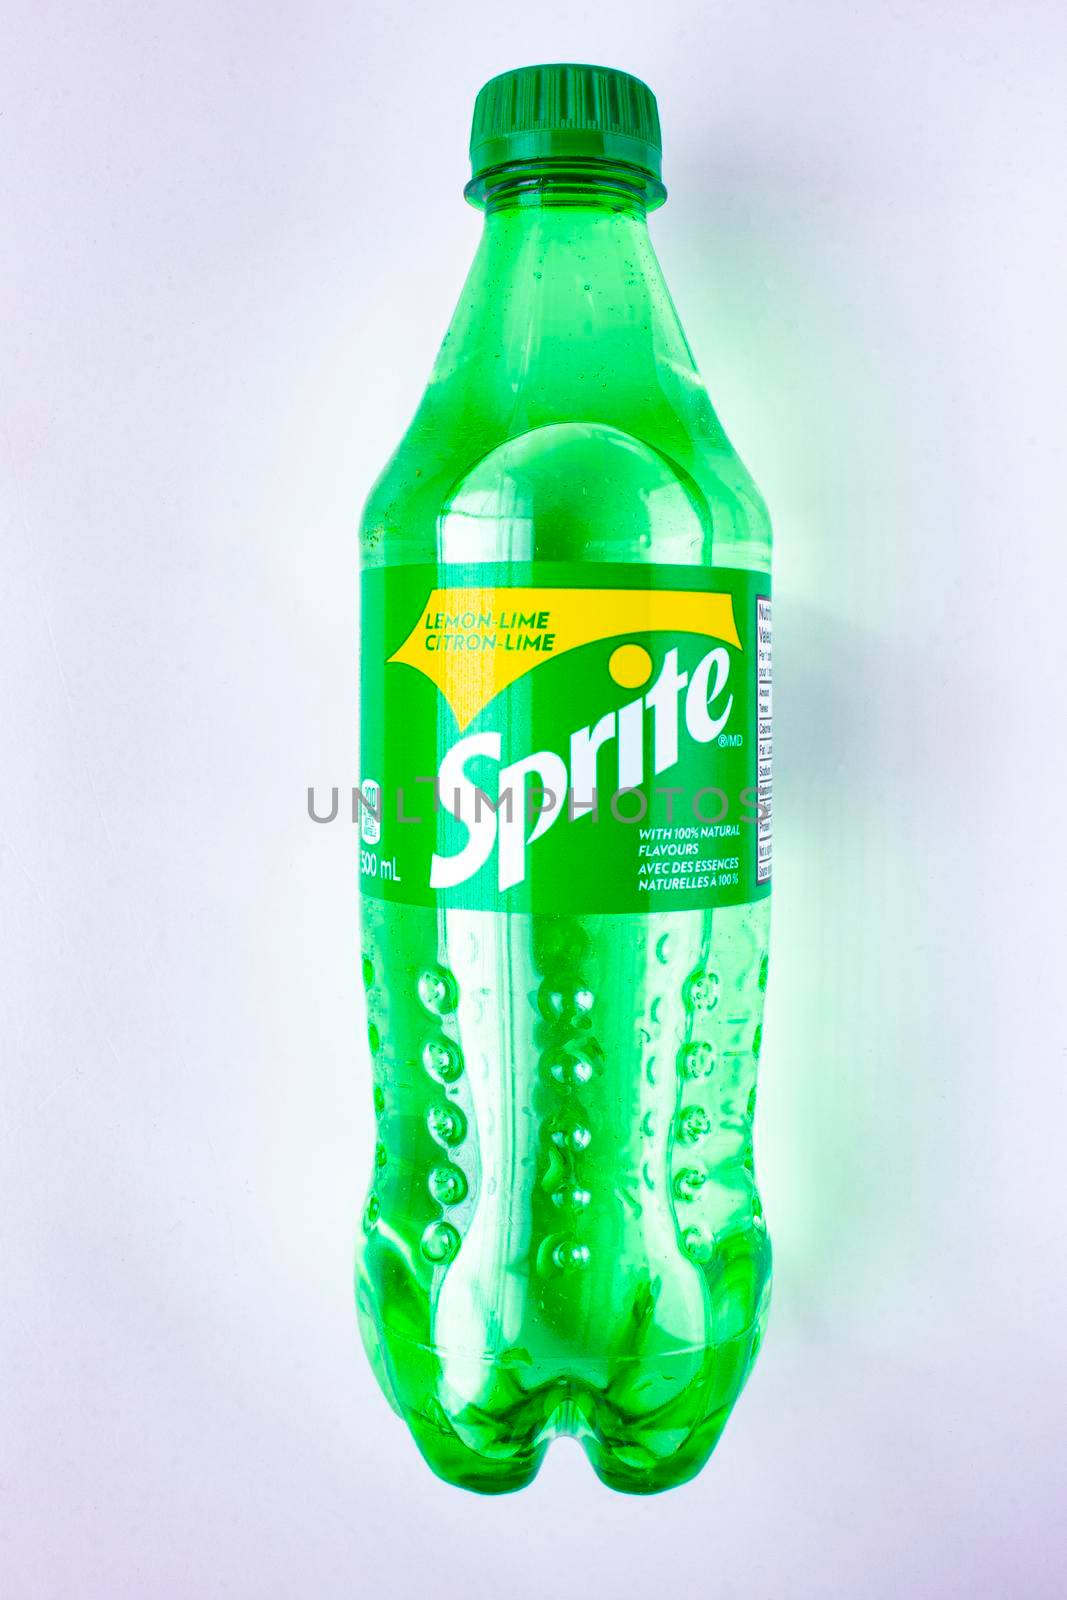 Calgary, Alberta, Canada. Oct 22. 2020. A Flat lay of a Sprite on white background.